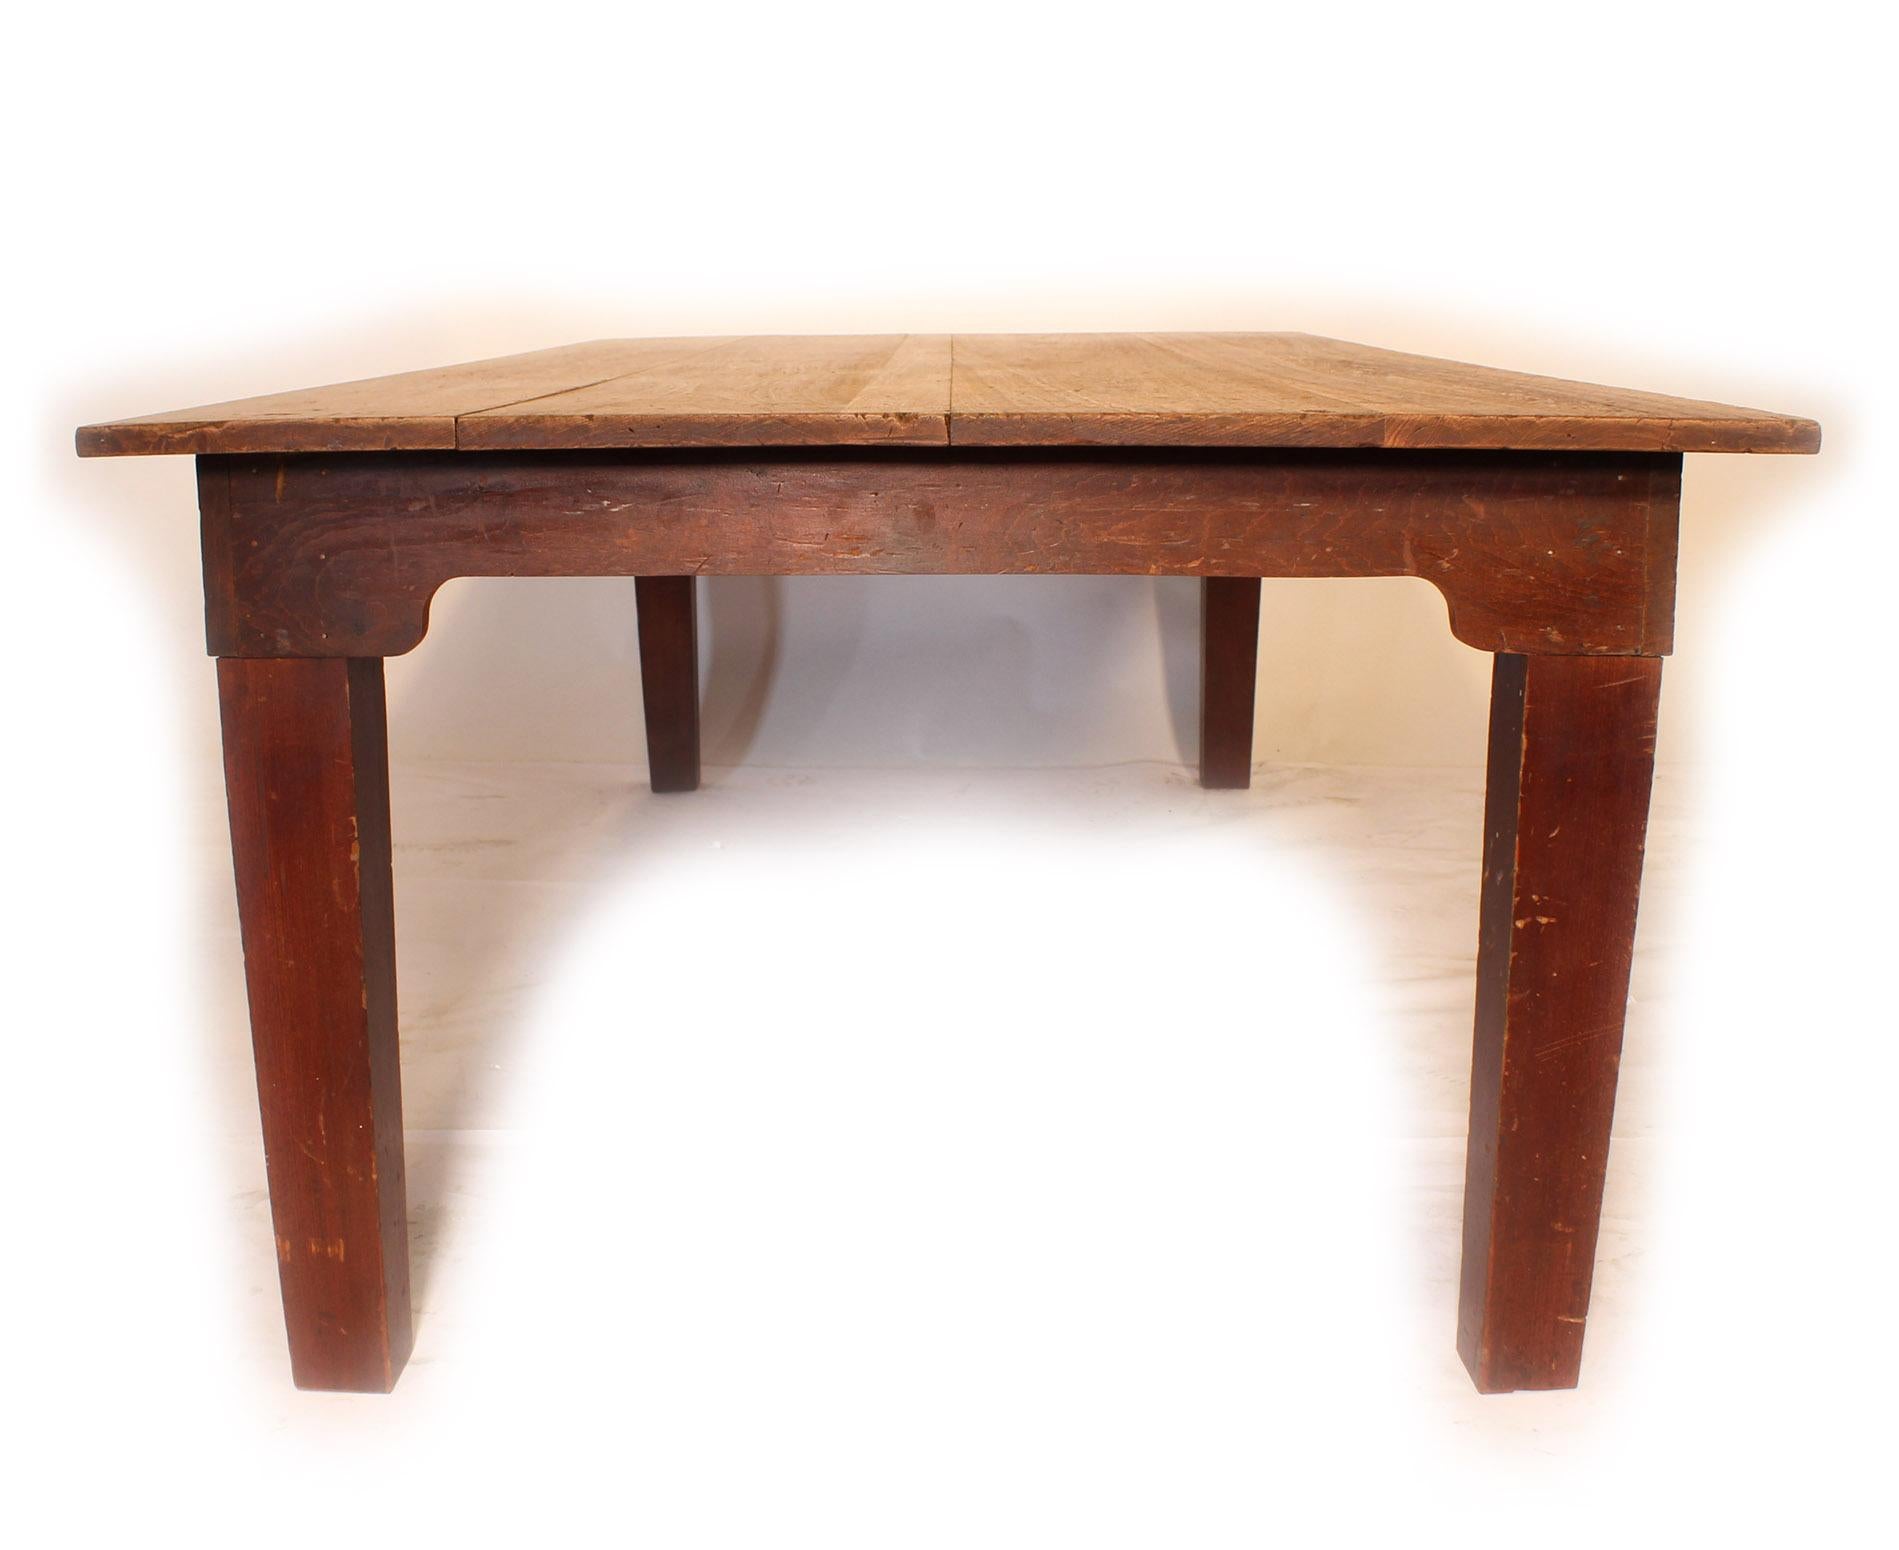 American Vintage Distressed Pine Farm / Harvest Table for Dining